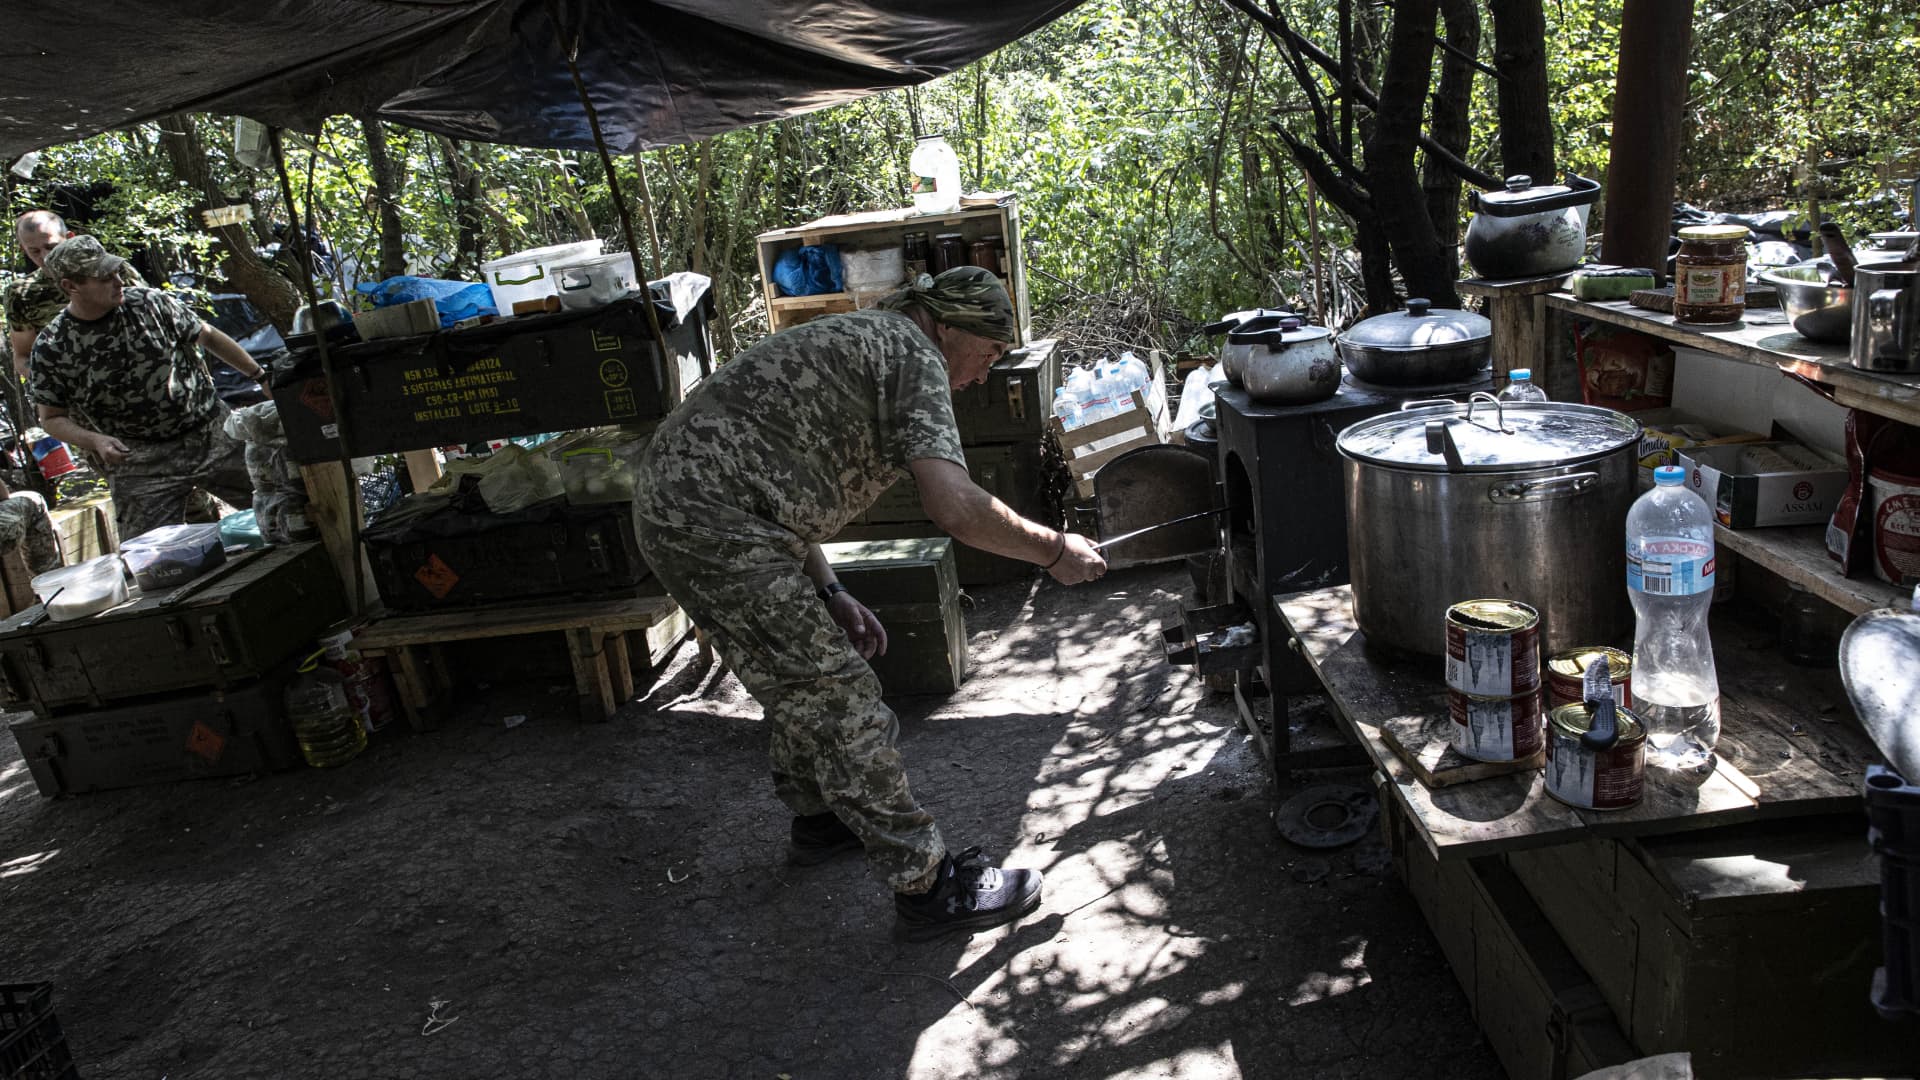 KHERSON, UKRAINE - JULY 15: Valodya, a 49-year-old man, volunteers as a cook for Ukrainian soldiers in Kherson, Kherson Oblast, Ukraine on July 15, 2022. Many Ukrainian citizens, who volunteered on the frontlines of the war, temporarily put their profession aside to support their country in various positions as official members of the army. (Photo by Metin Aktas/Anadolu Agency via Getty Images)